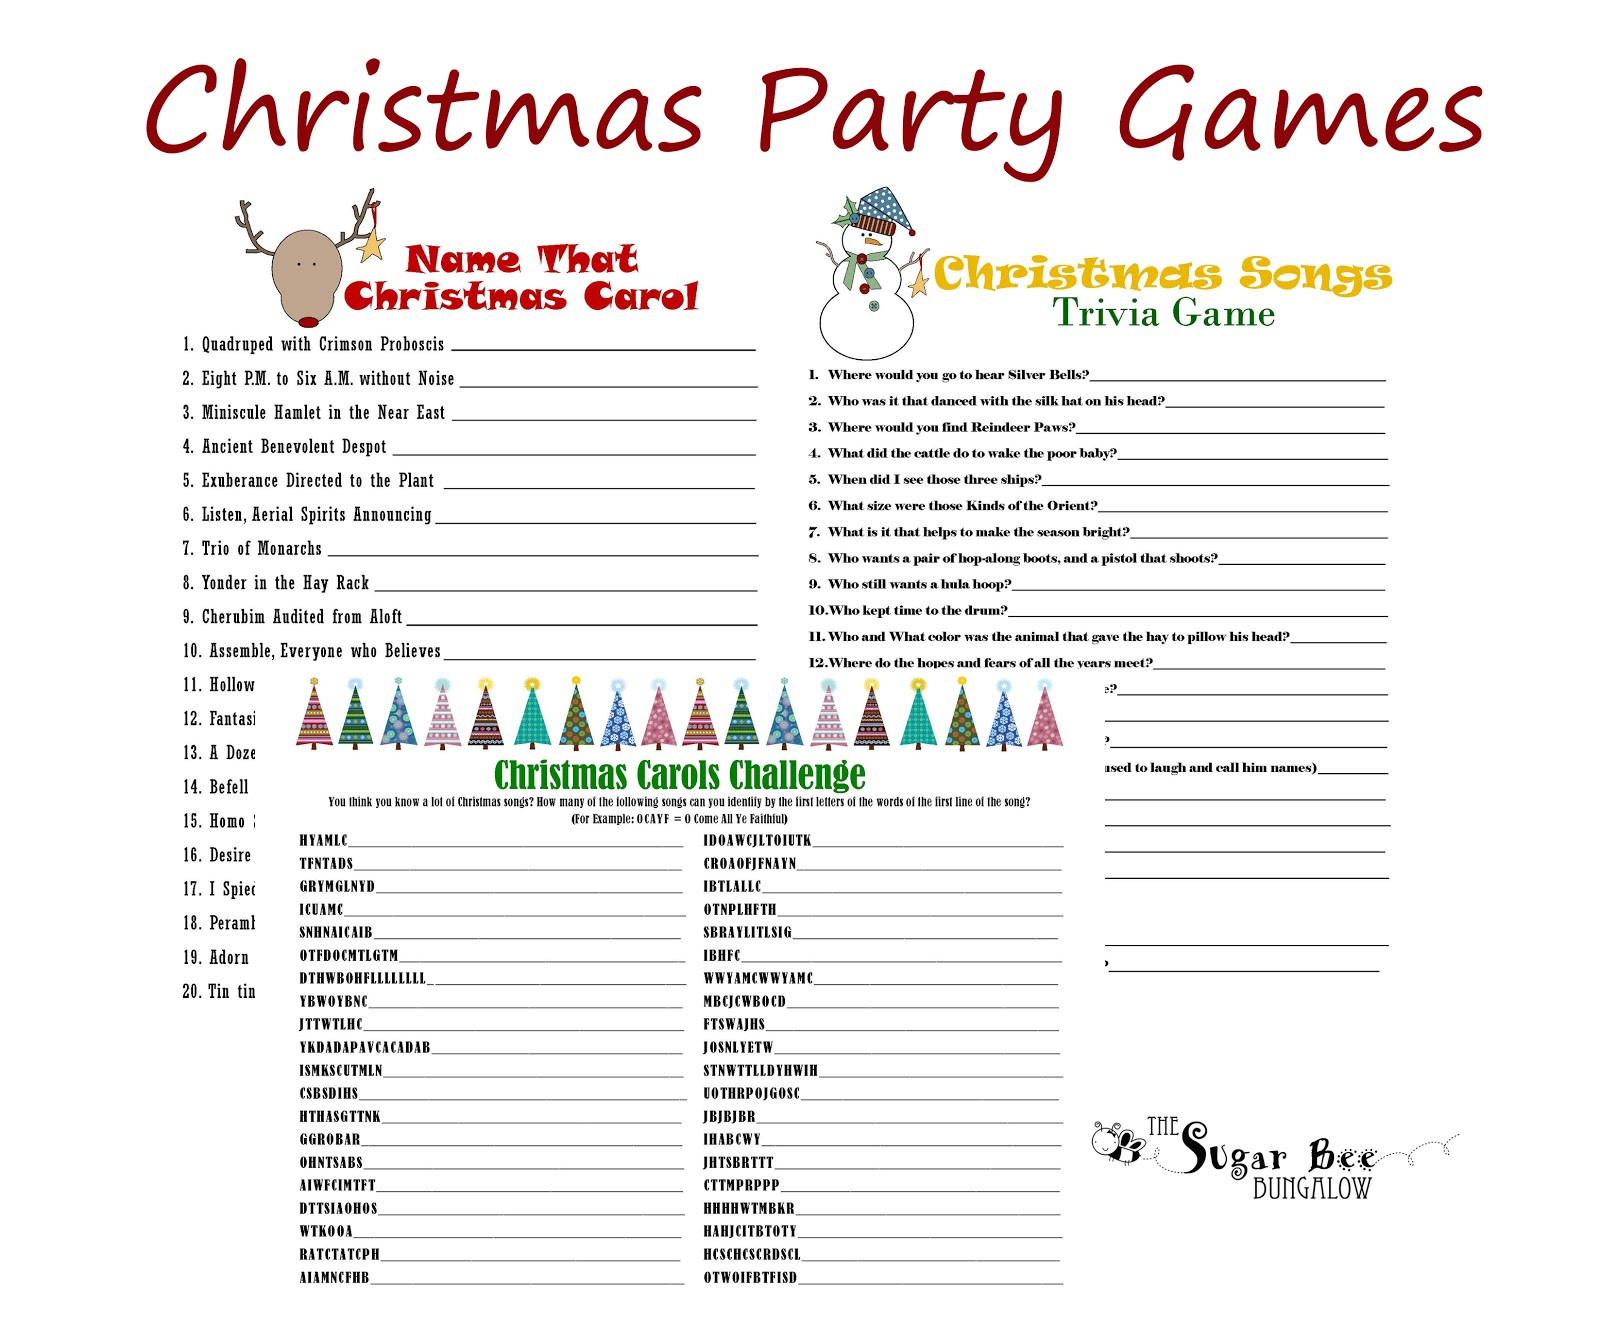 Work Christmas Party Ideas For Adults
 The Sugar Bee Bungalow December 2012